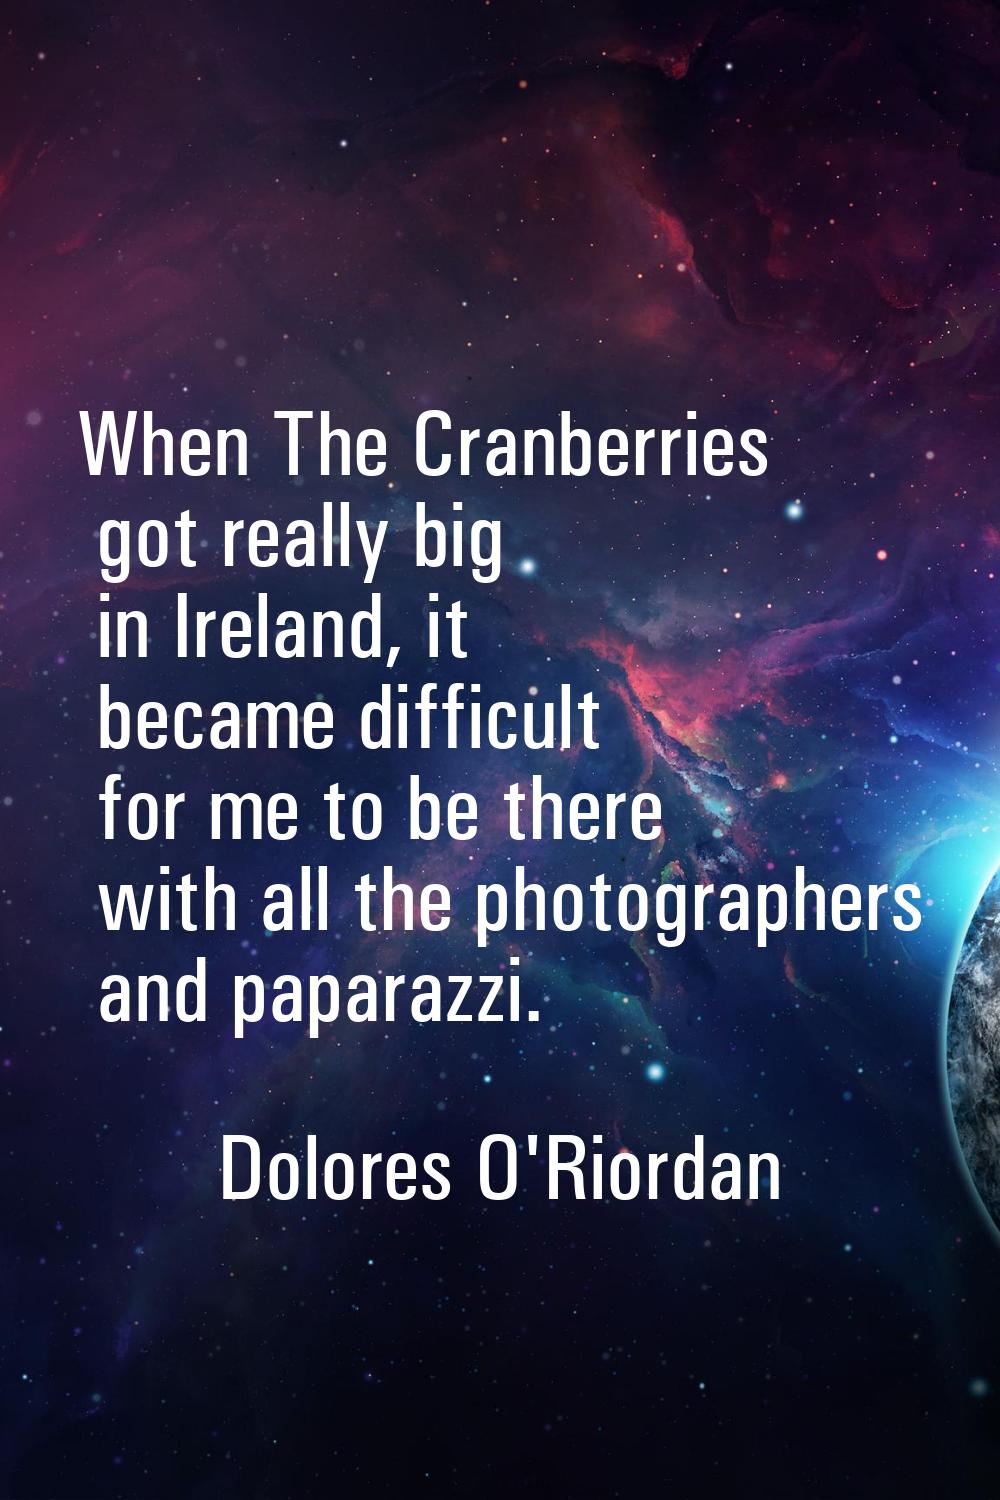 When The Cranberries got really big in Ireland, it became difficult for me to be there with all the